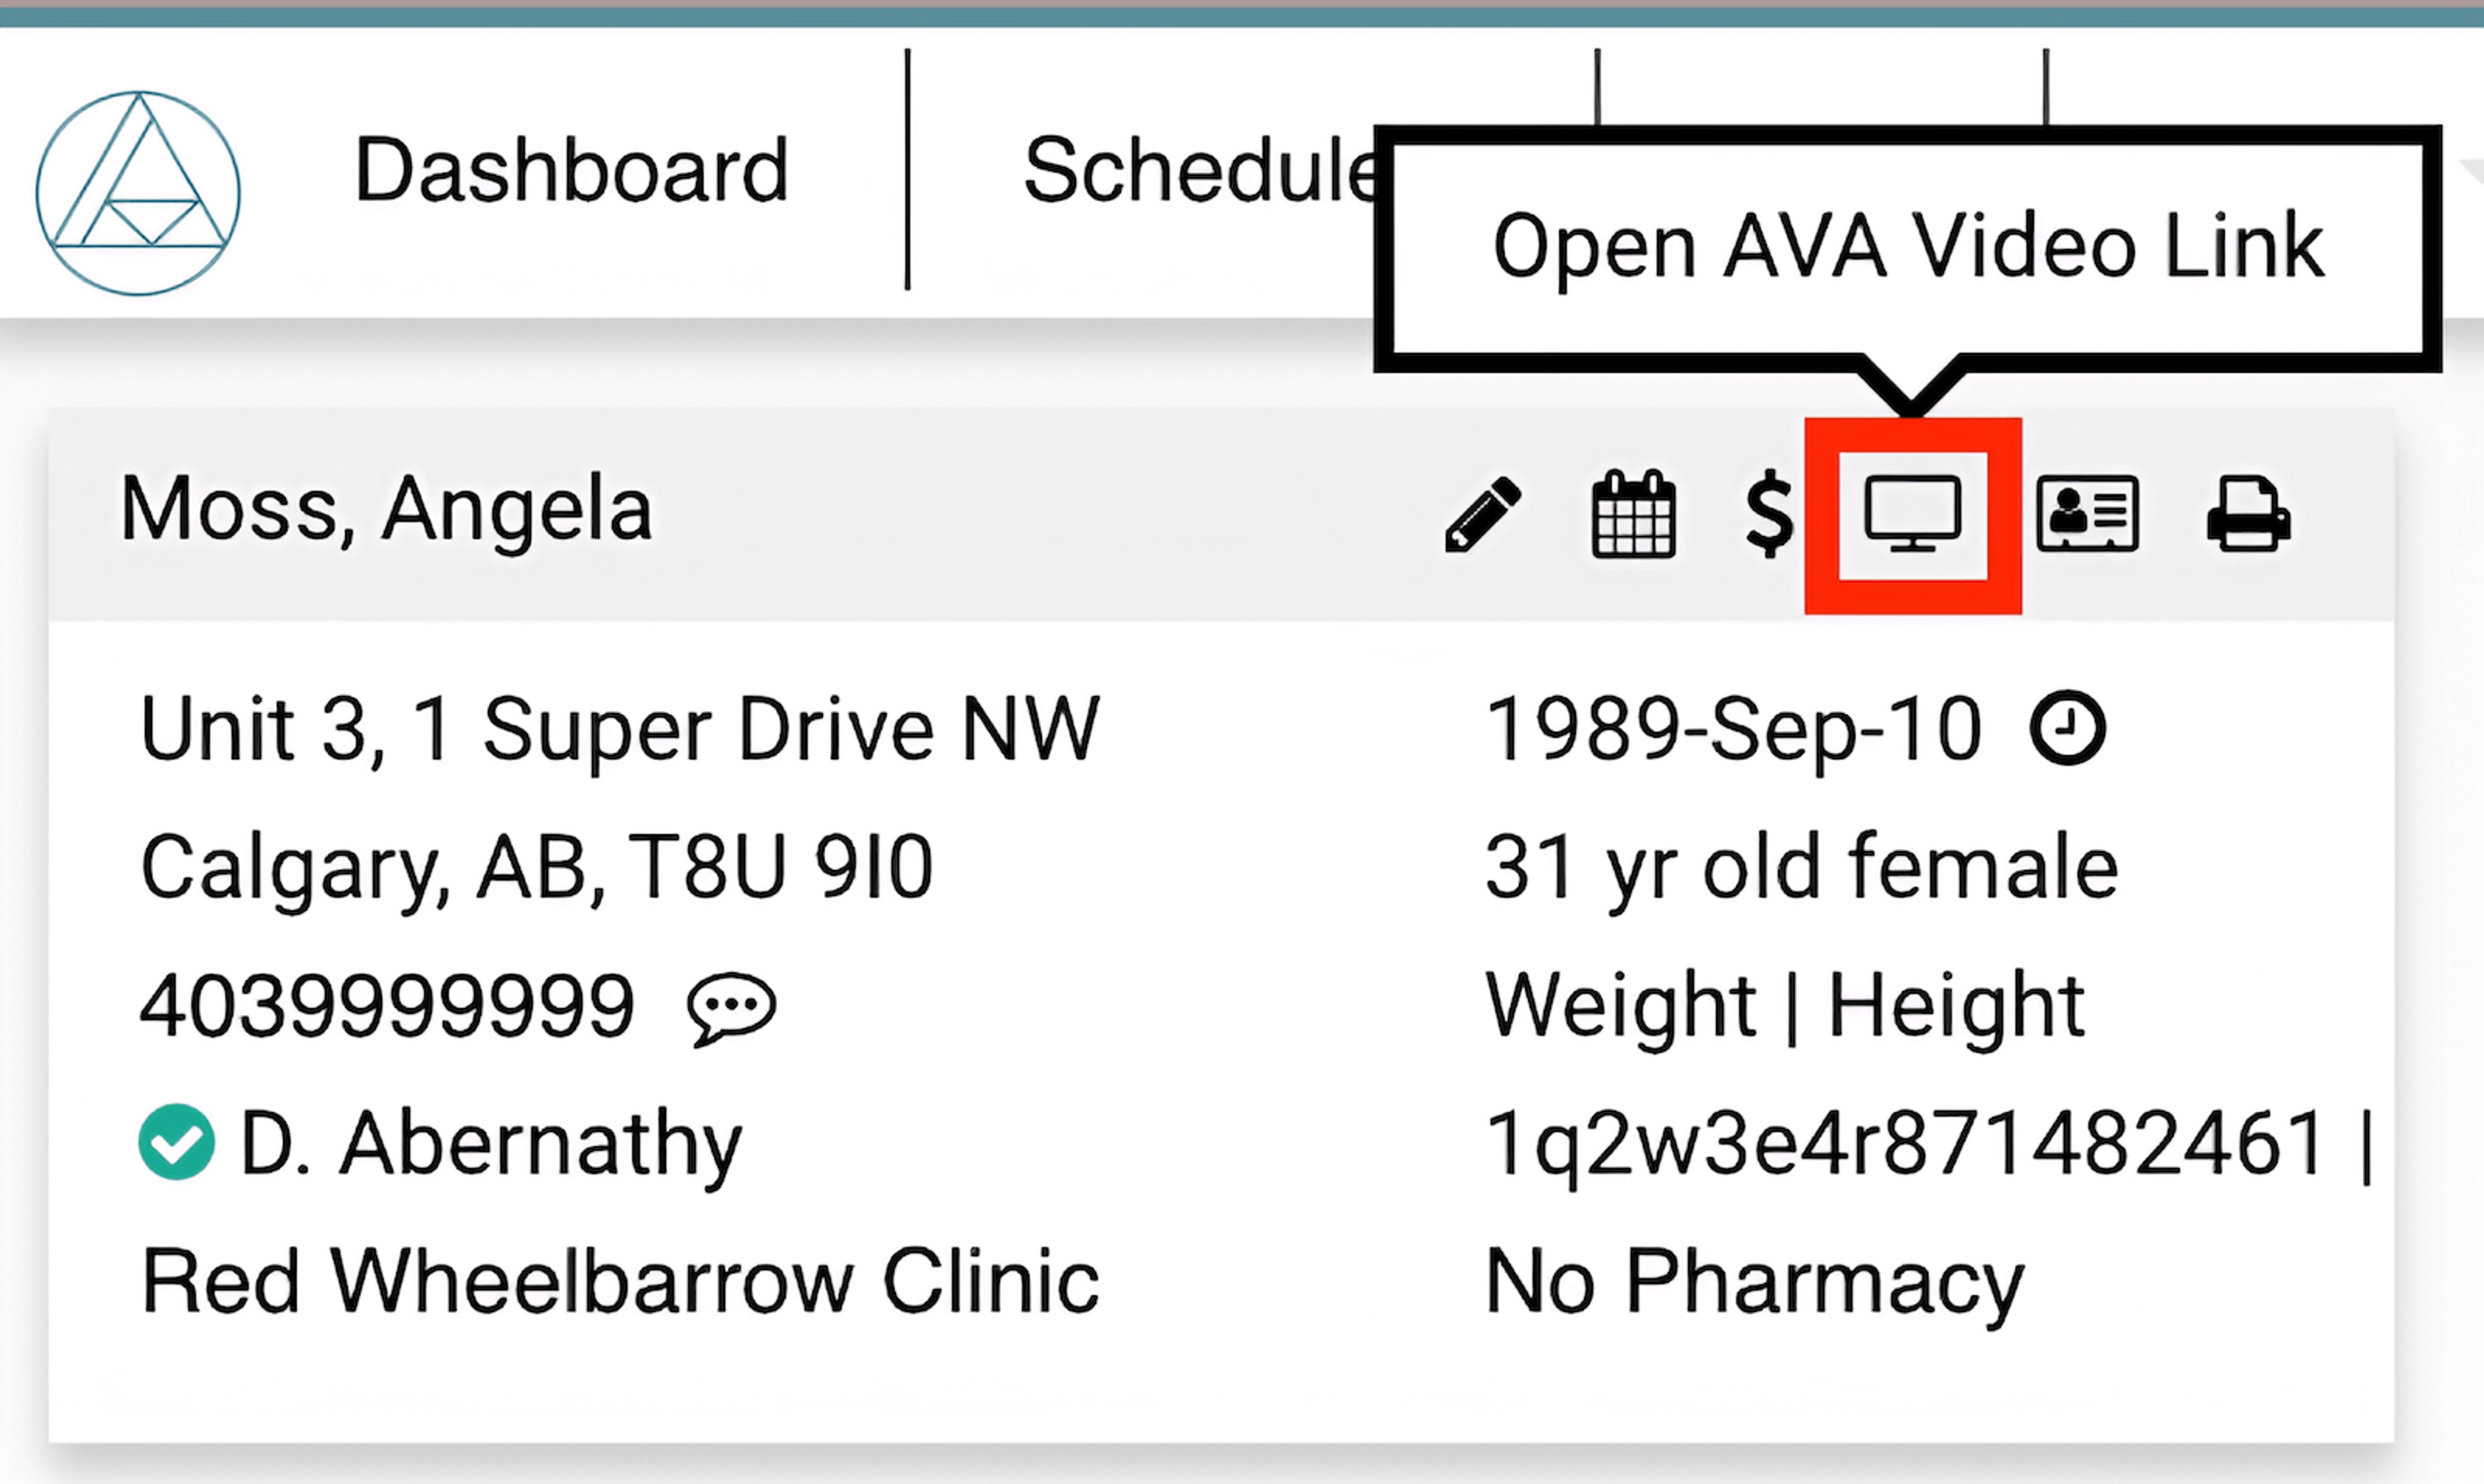 Ava dashboard with a highlighted square around the 'Open Ava Video Link' icon button.